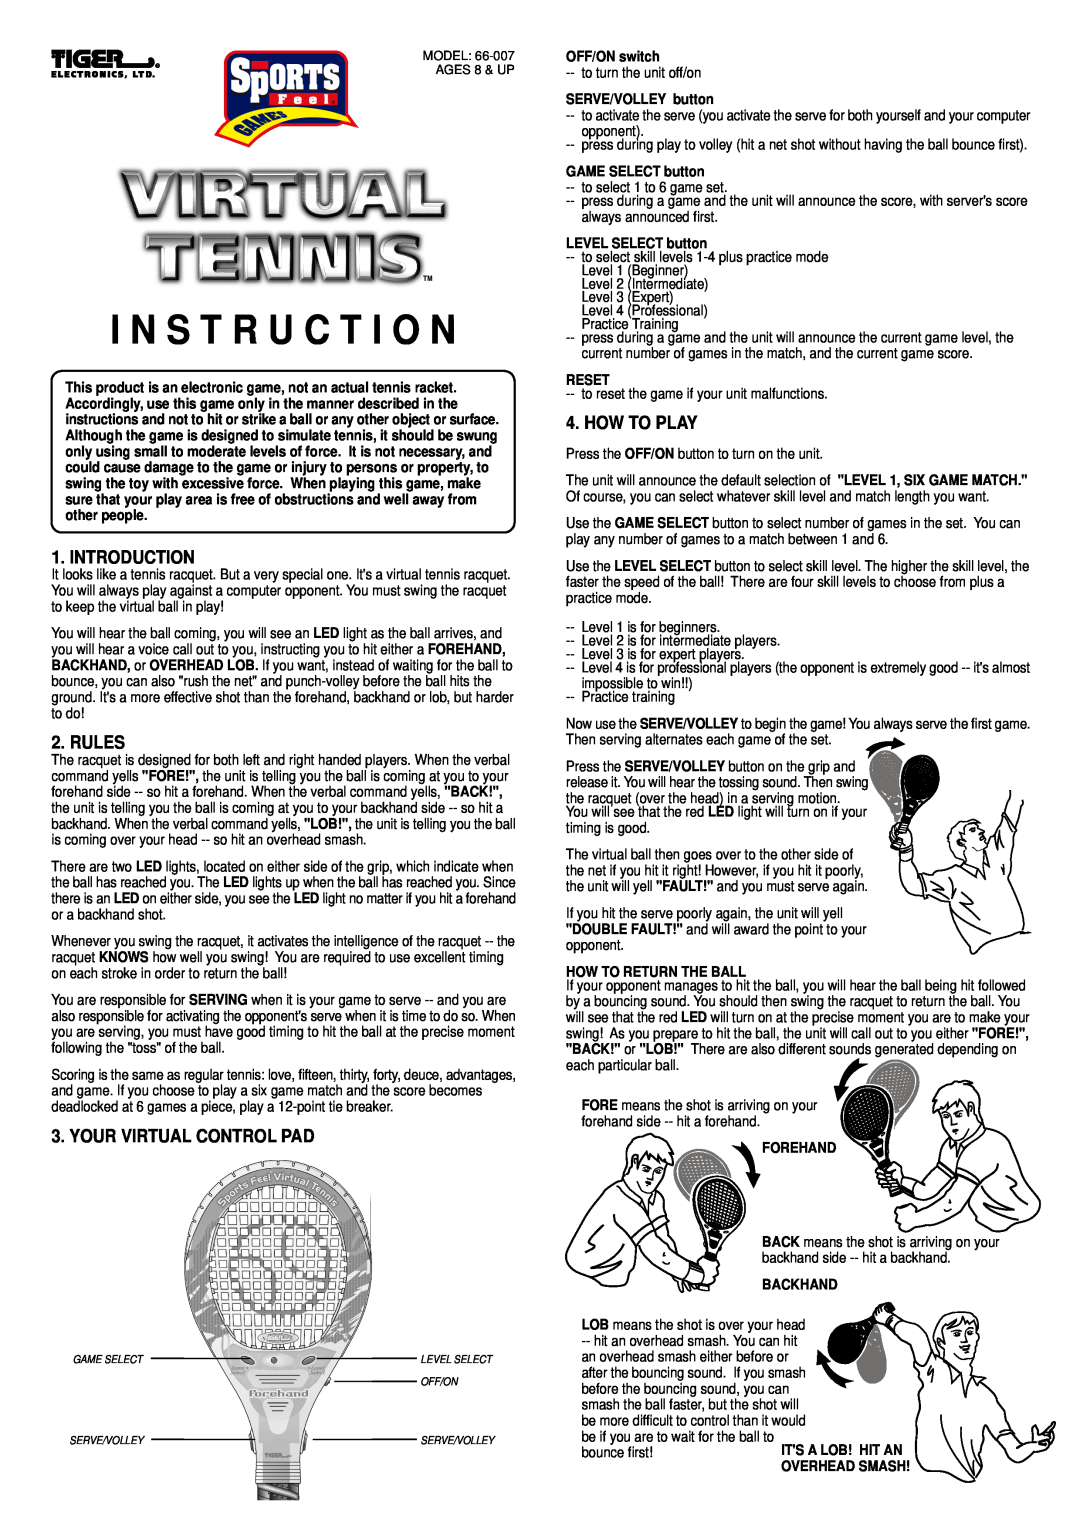 Tiger 66-007 manual Introduction, Rules, Your Virtual Control Pad, How To Play, OFF/ON switch, SERVE/VOLLEY button, Reset 